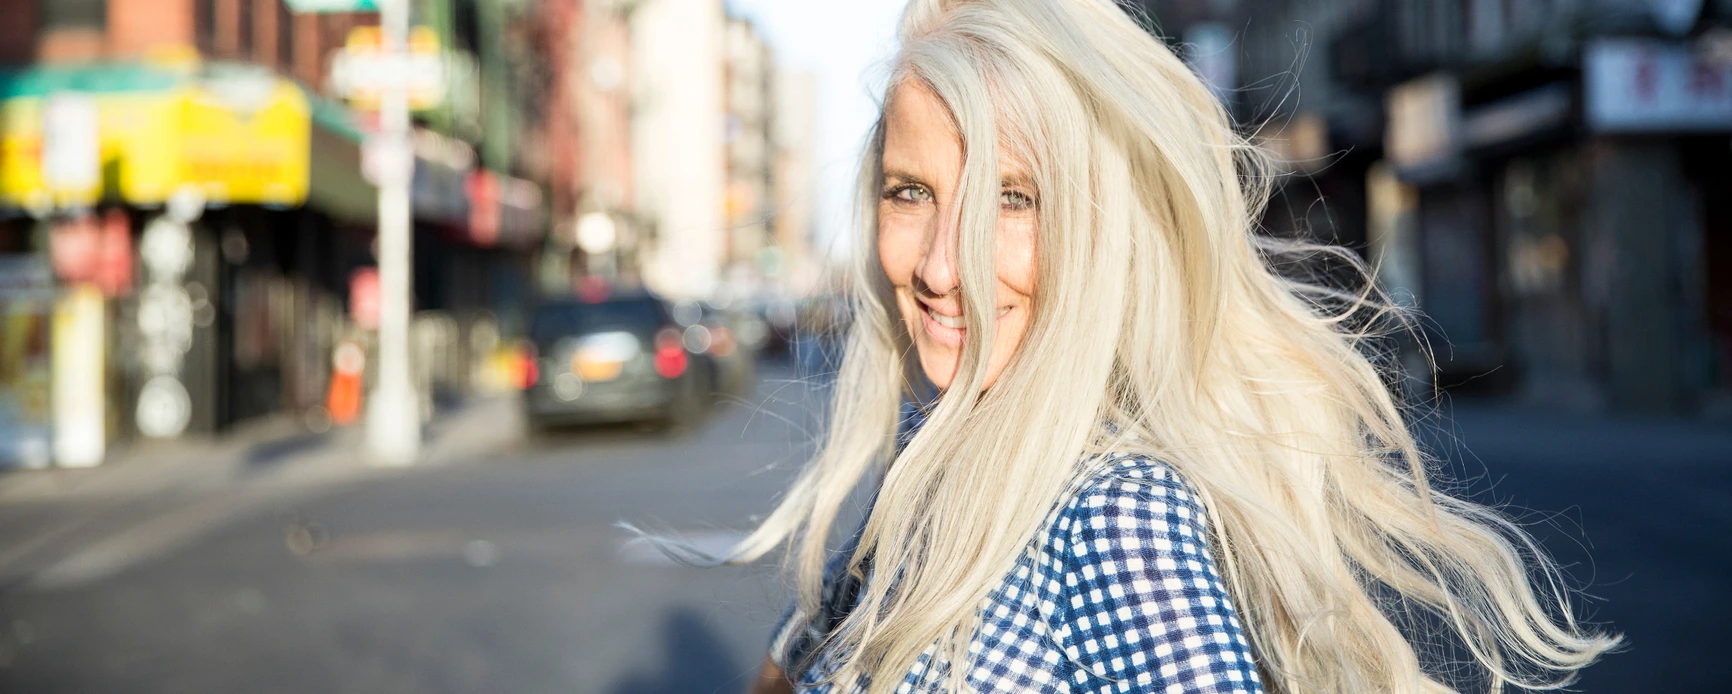 Woman with long white hair looking back smiling on city street, smiling with sun in her face.